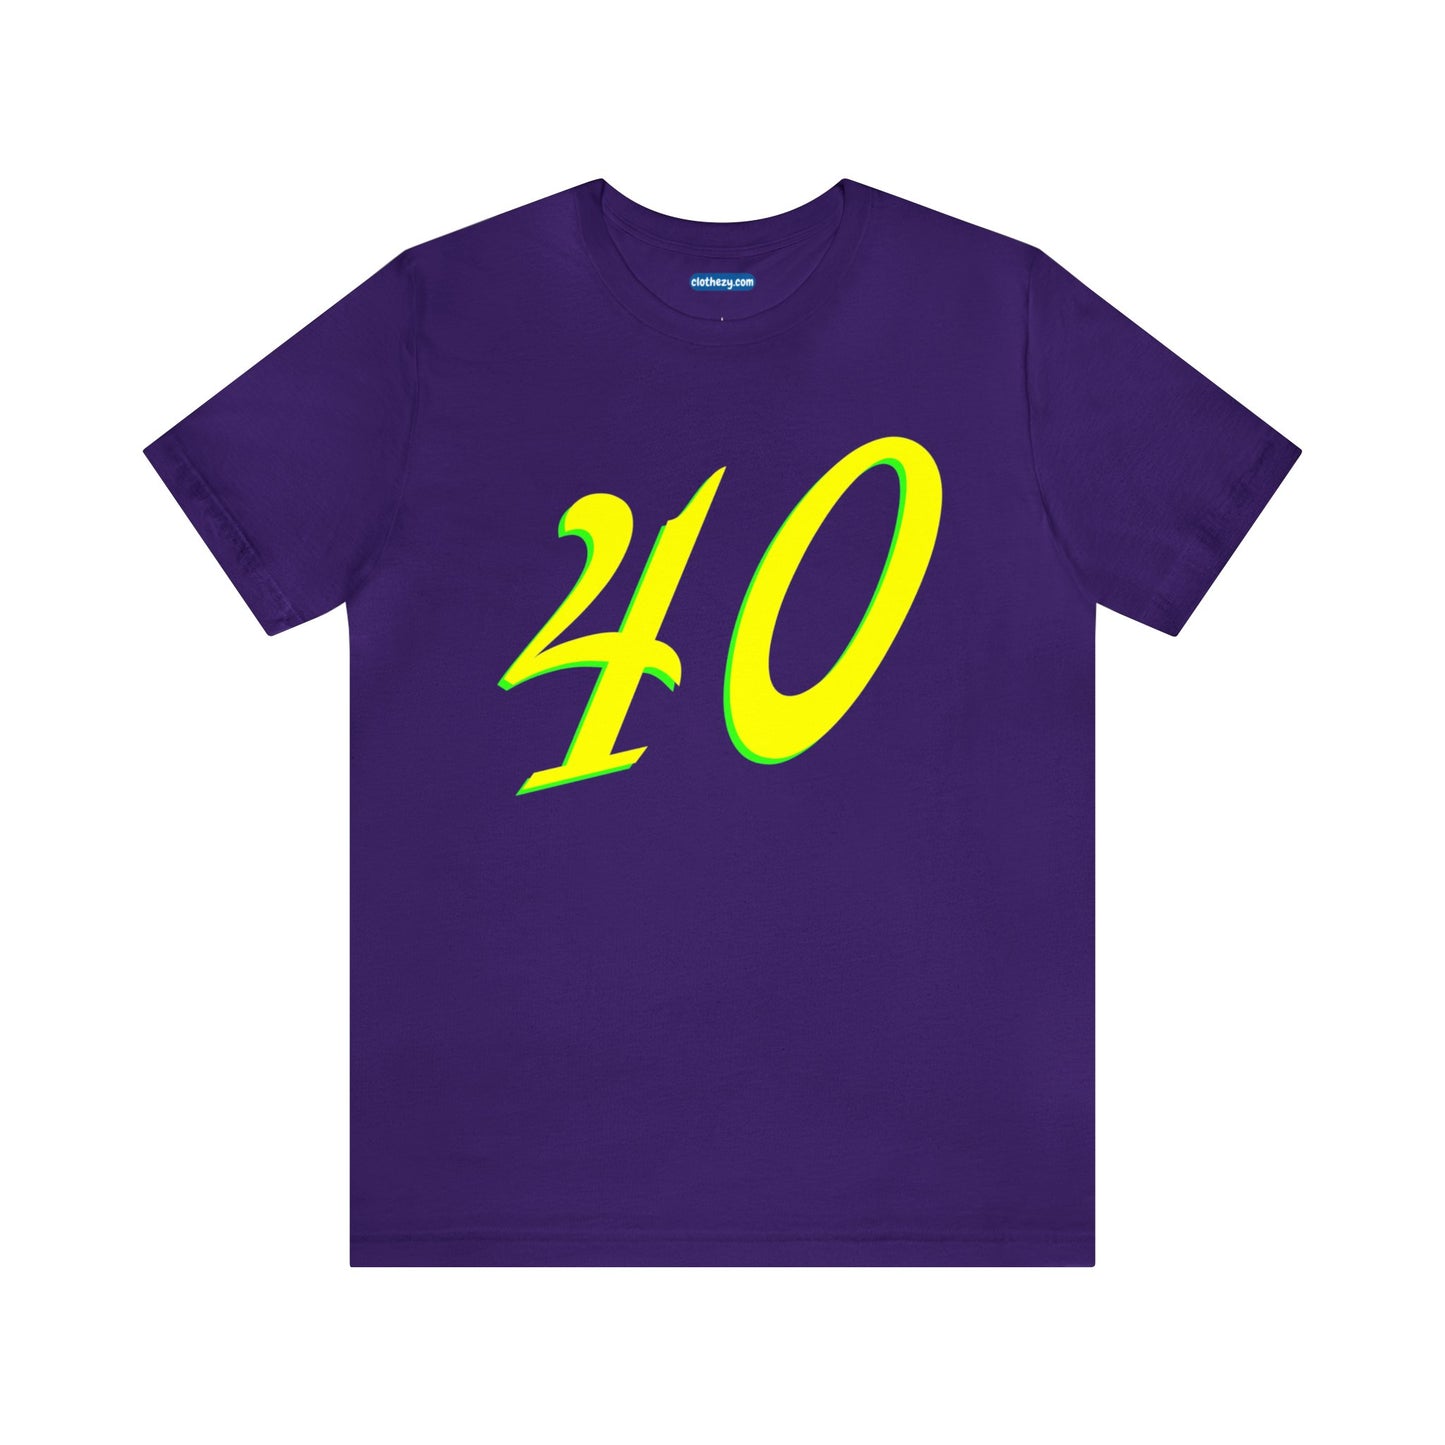 Number 40 Design - Soft Cotton Tee for birthdays and celebrations, Gift for friends and family, Multiple Options by clothezy.com in Purple Size Small - Buy Now